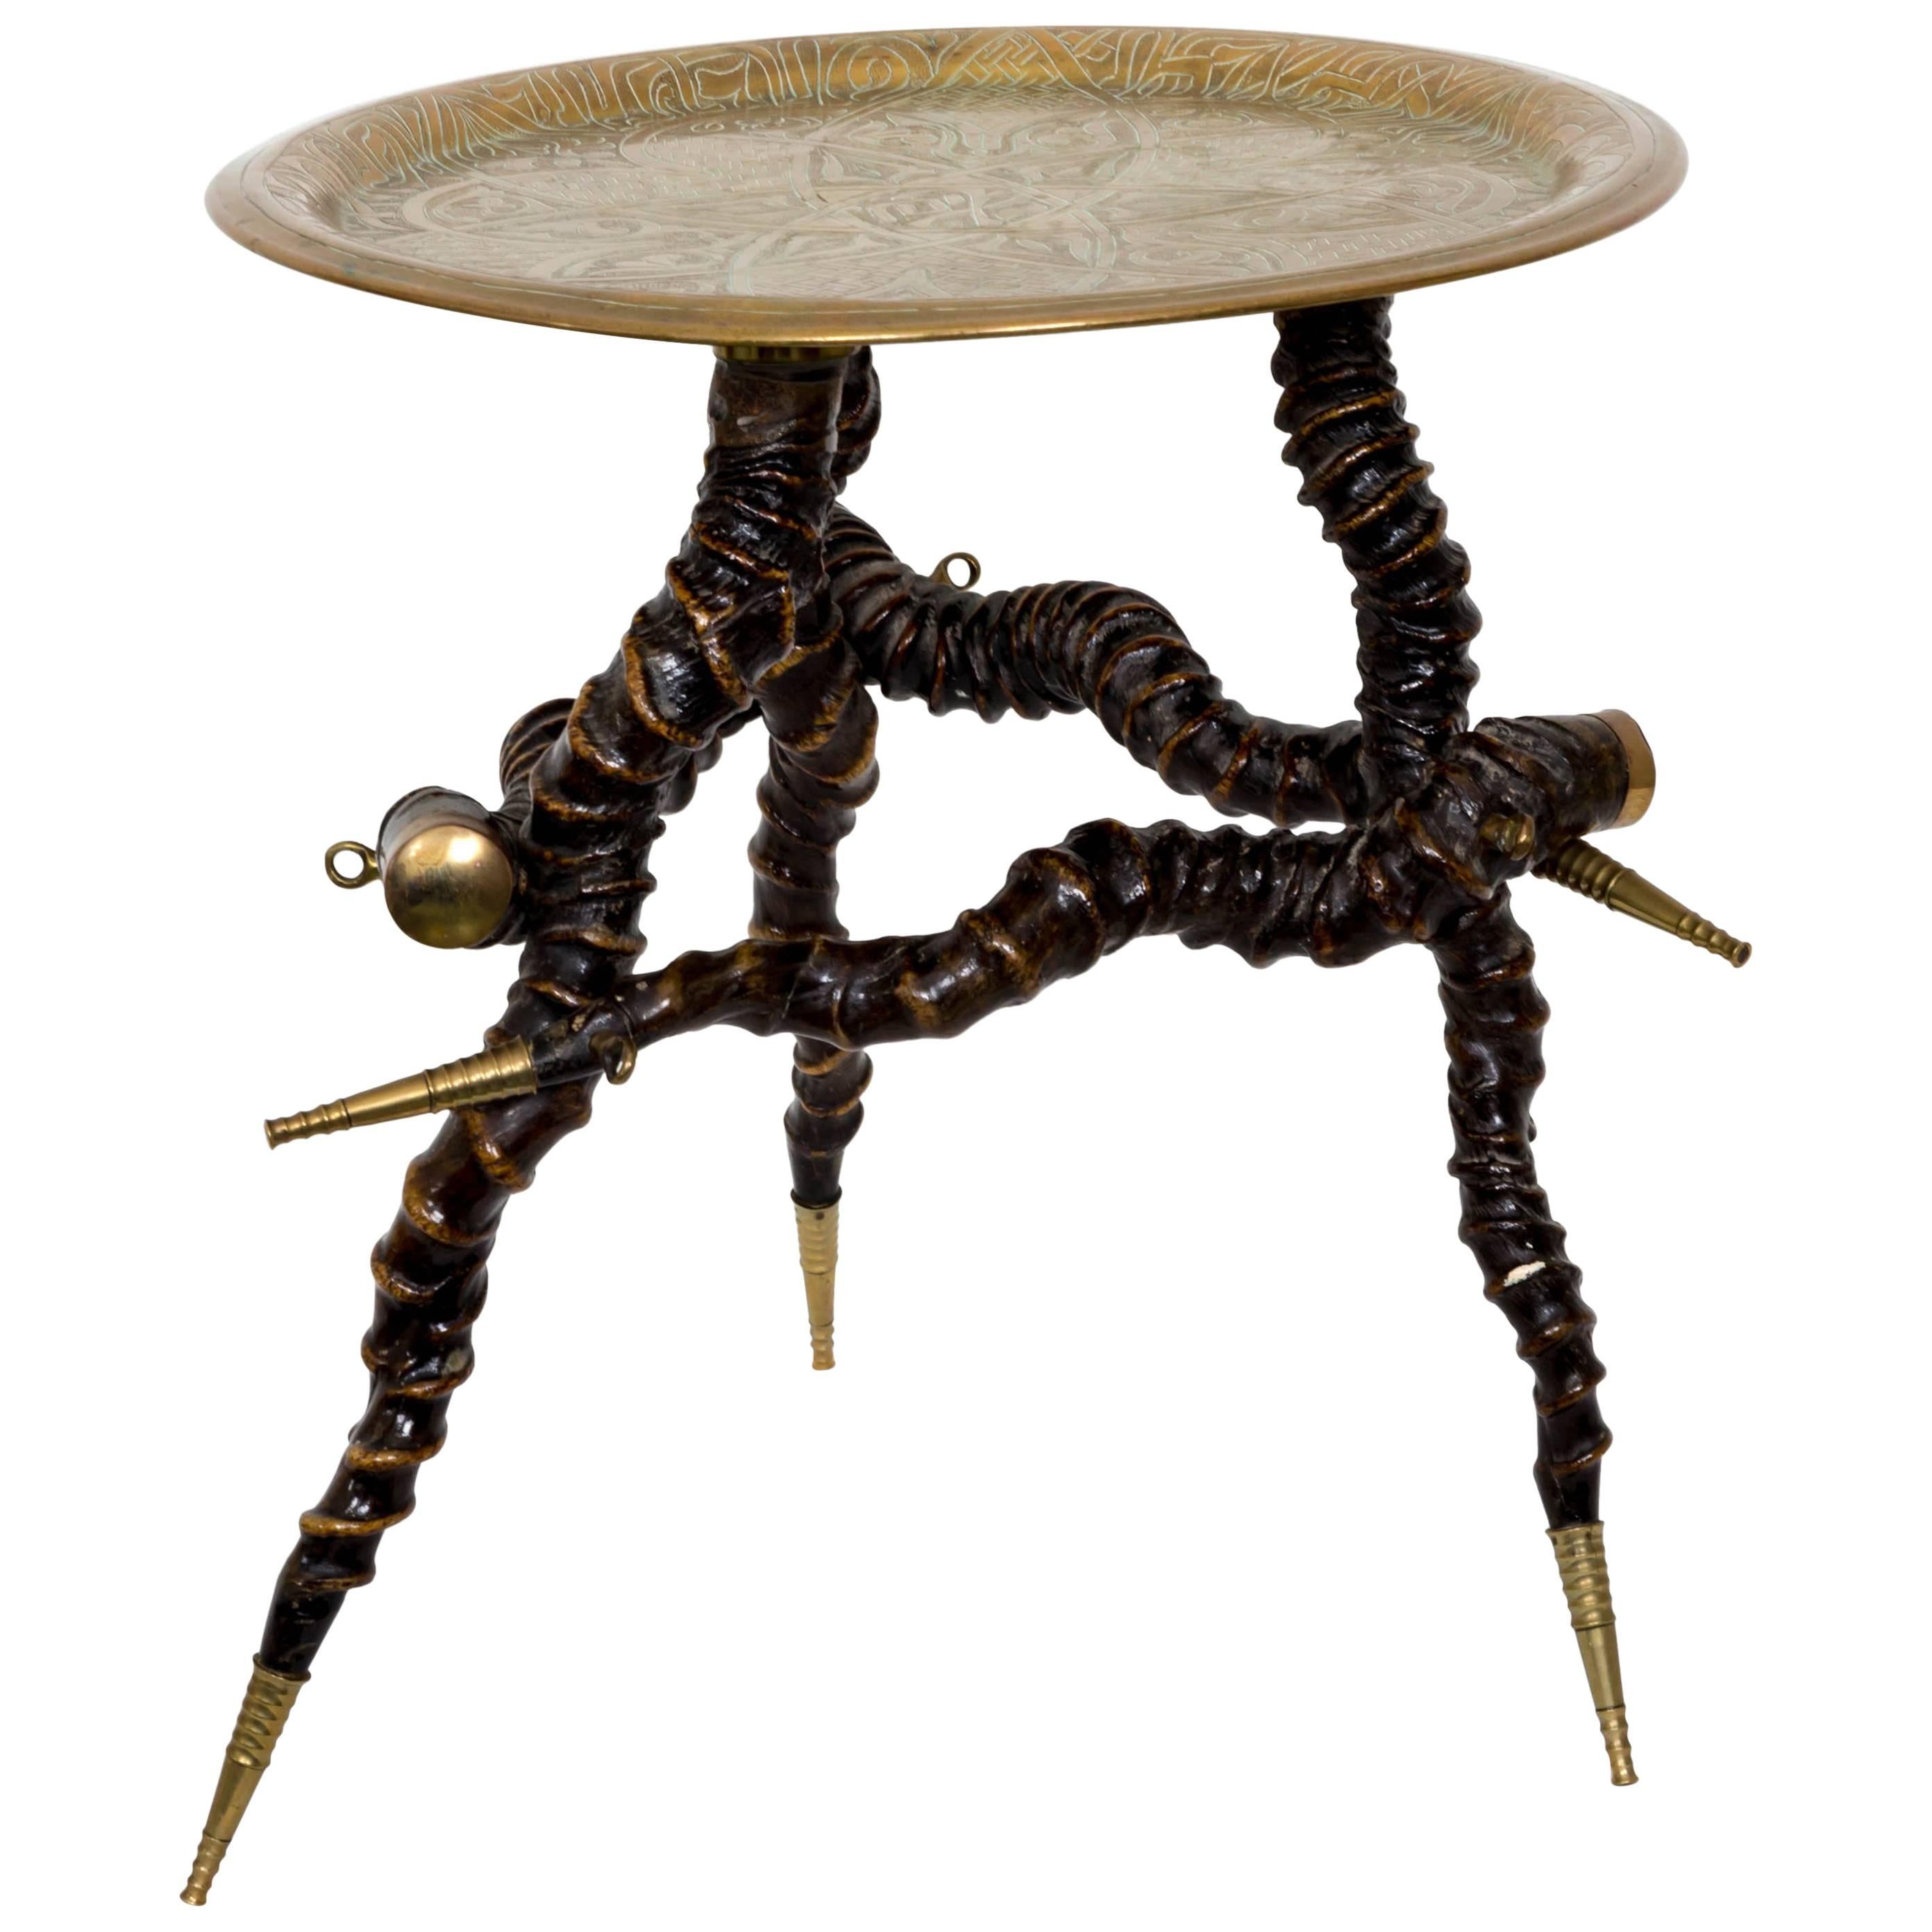 Vintage Twisted Horn Occasional Table with Brass Top and Feet